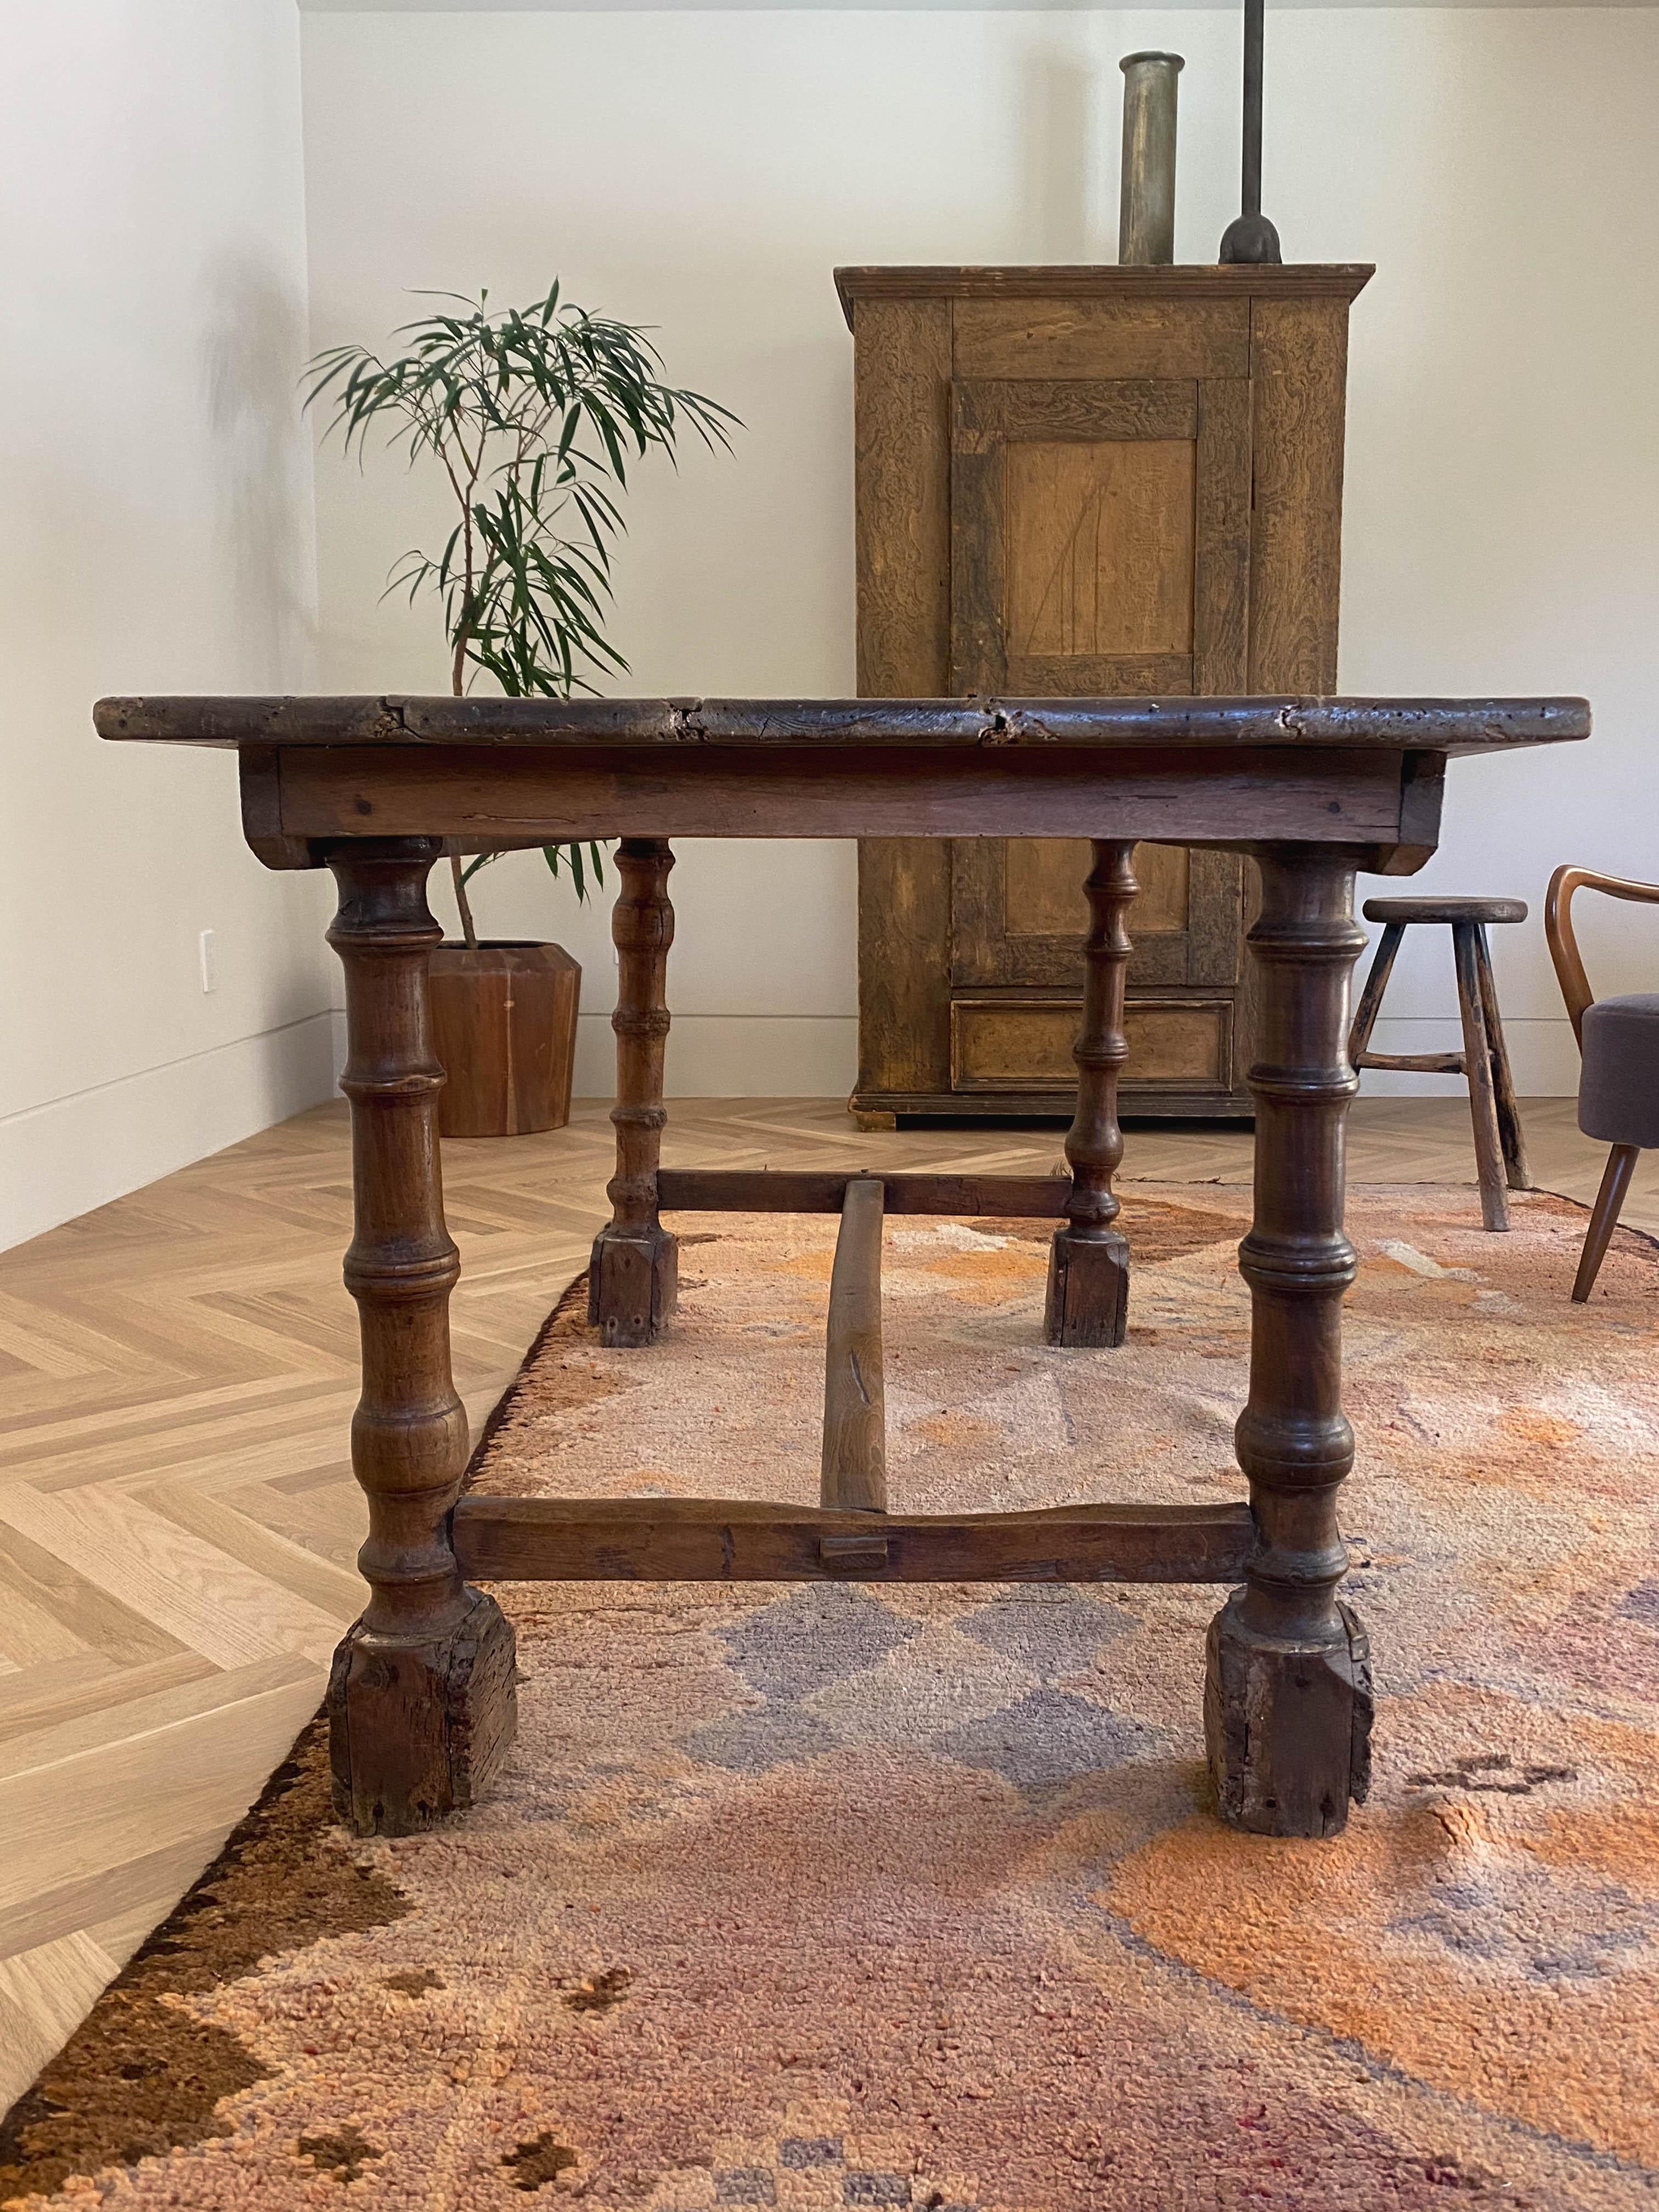 Italian Rustic 19th Century Pine Table with Robust Leg Detailing For Sale